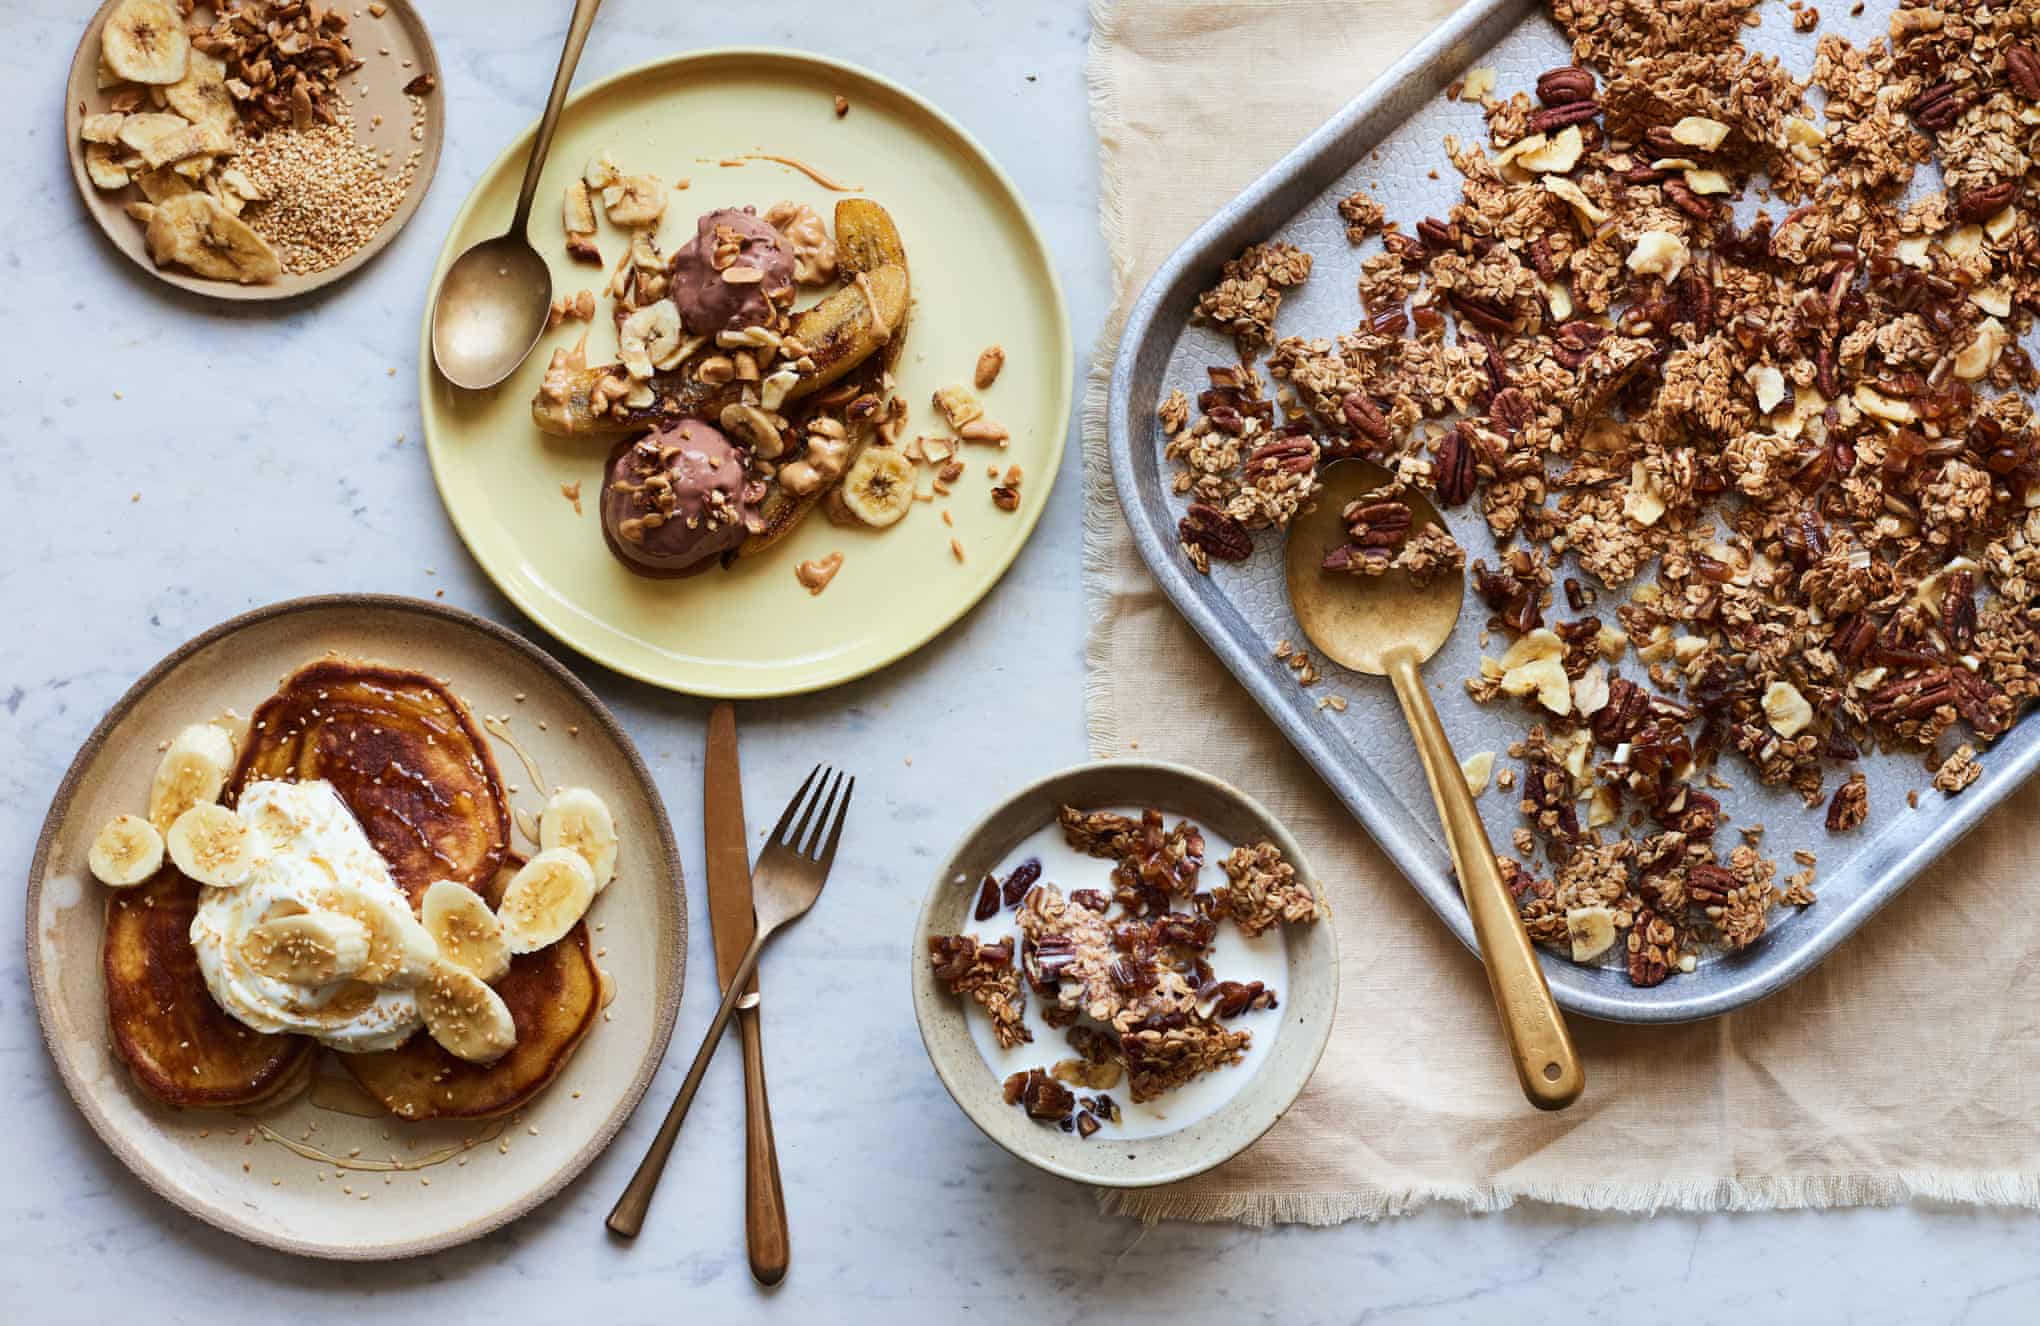 Banana splits and drop scones: Claire Thomson’s banana recipes for kids